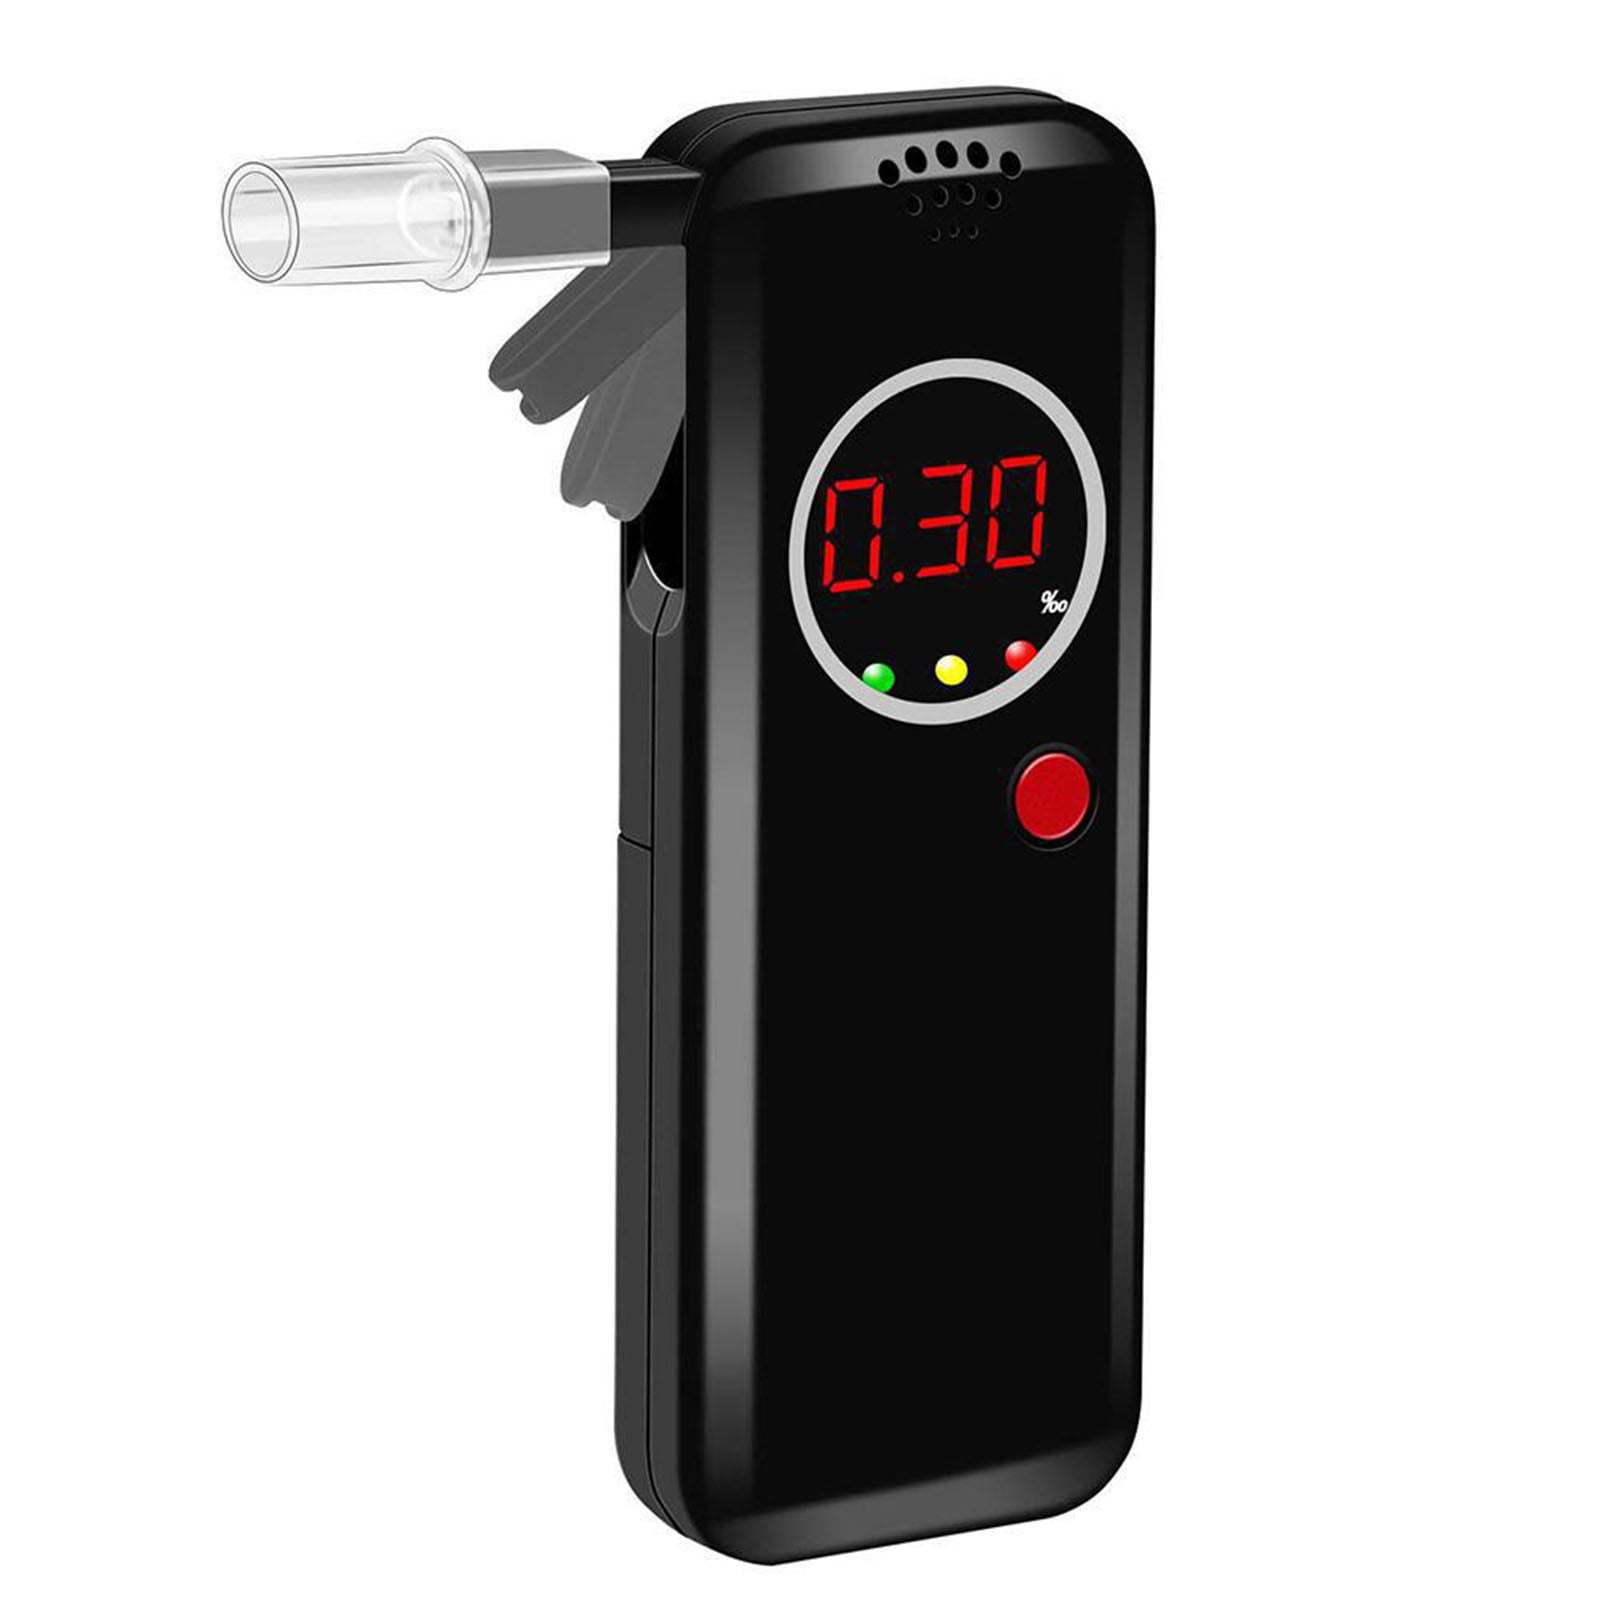 Breathalyzer Alcohol Breathalyser Portable With Large LCD Display Alcohol Tester 6PCS Mouthpieces And 1 Storage Bag 